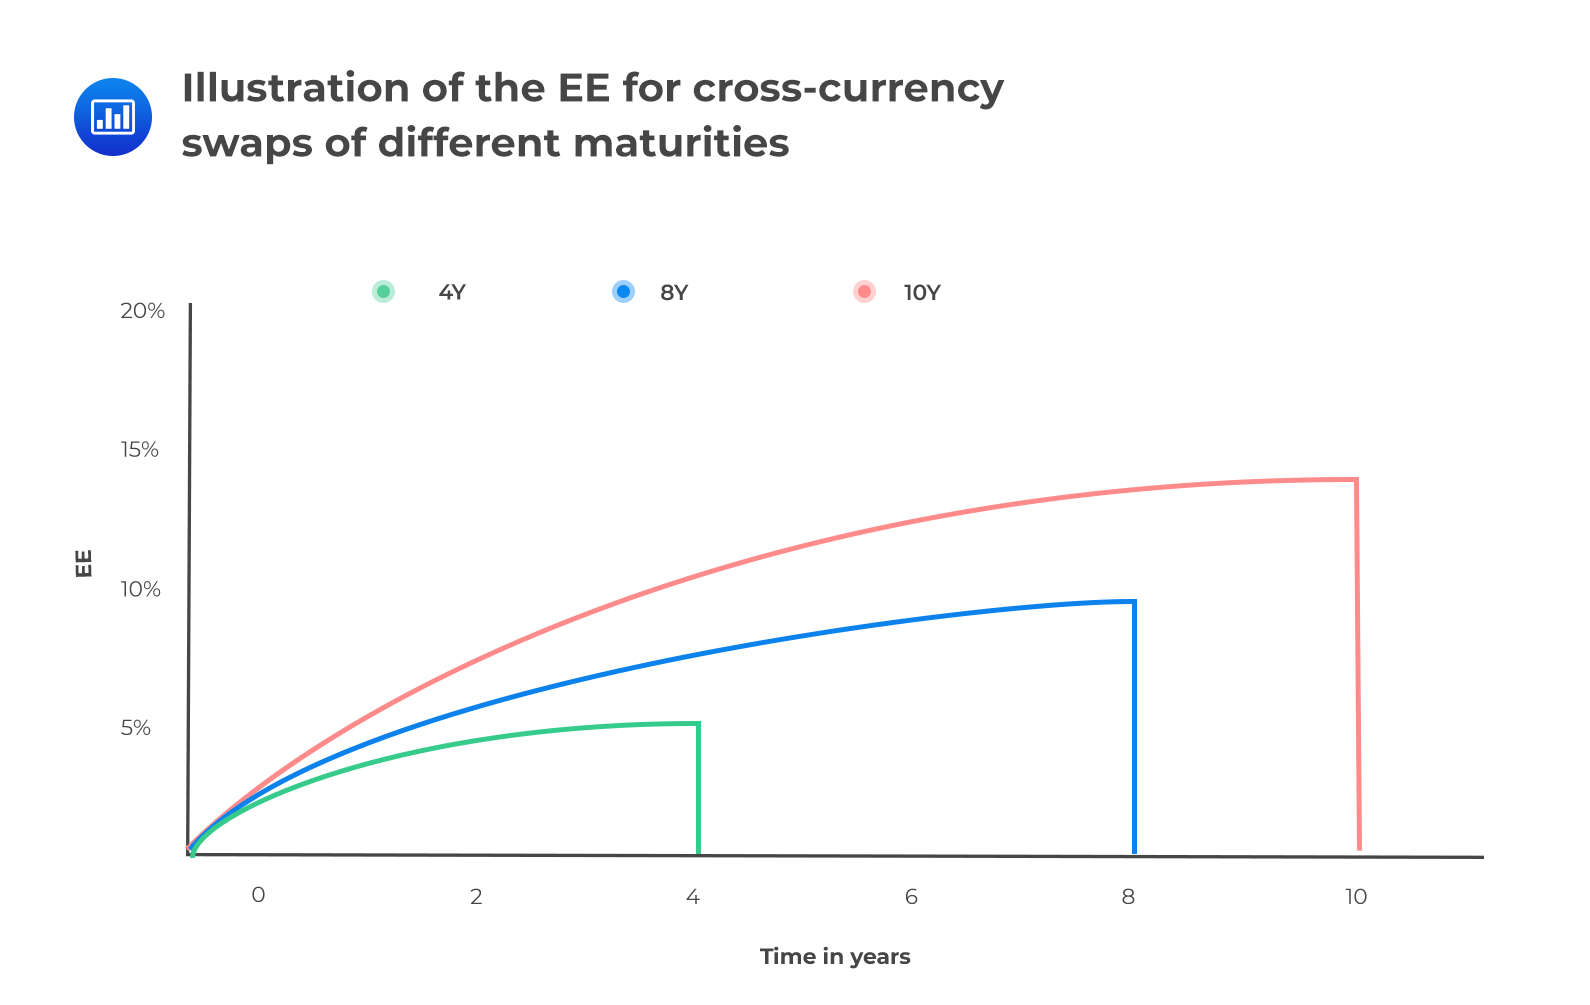 Illustration of the EE for cross-currency swaps of different maturities